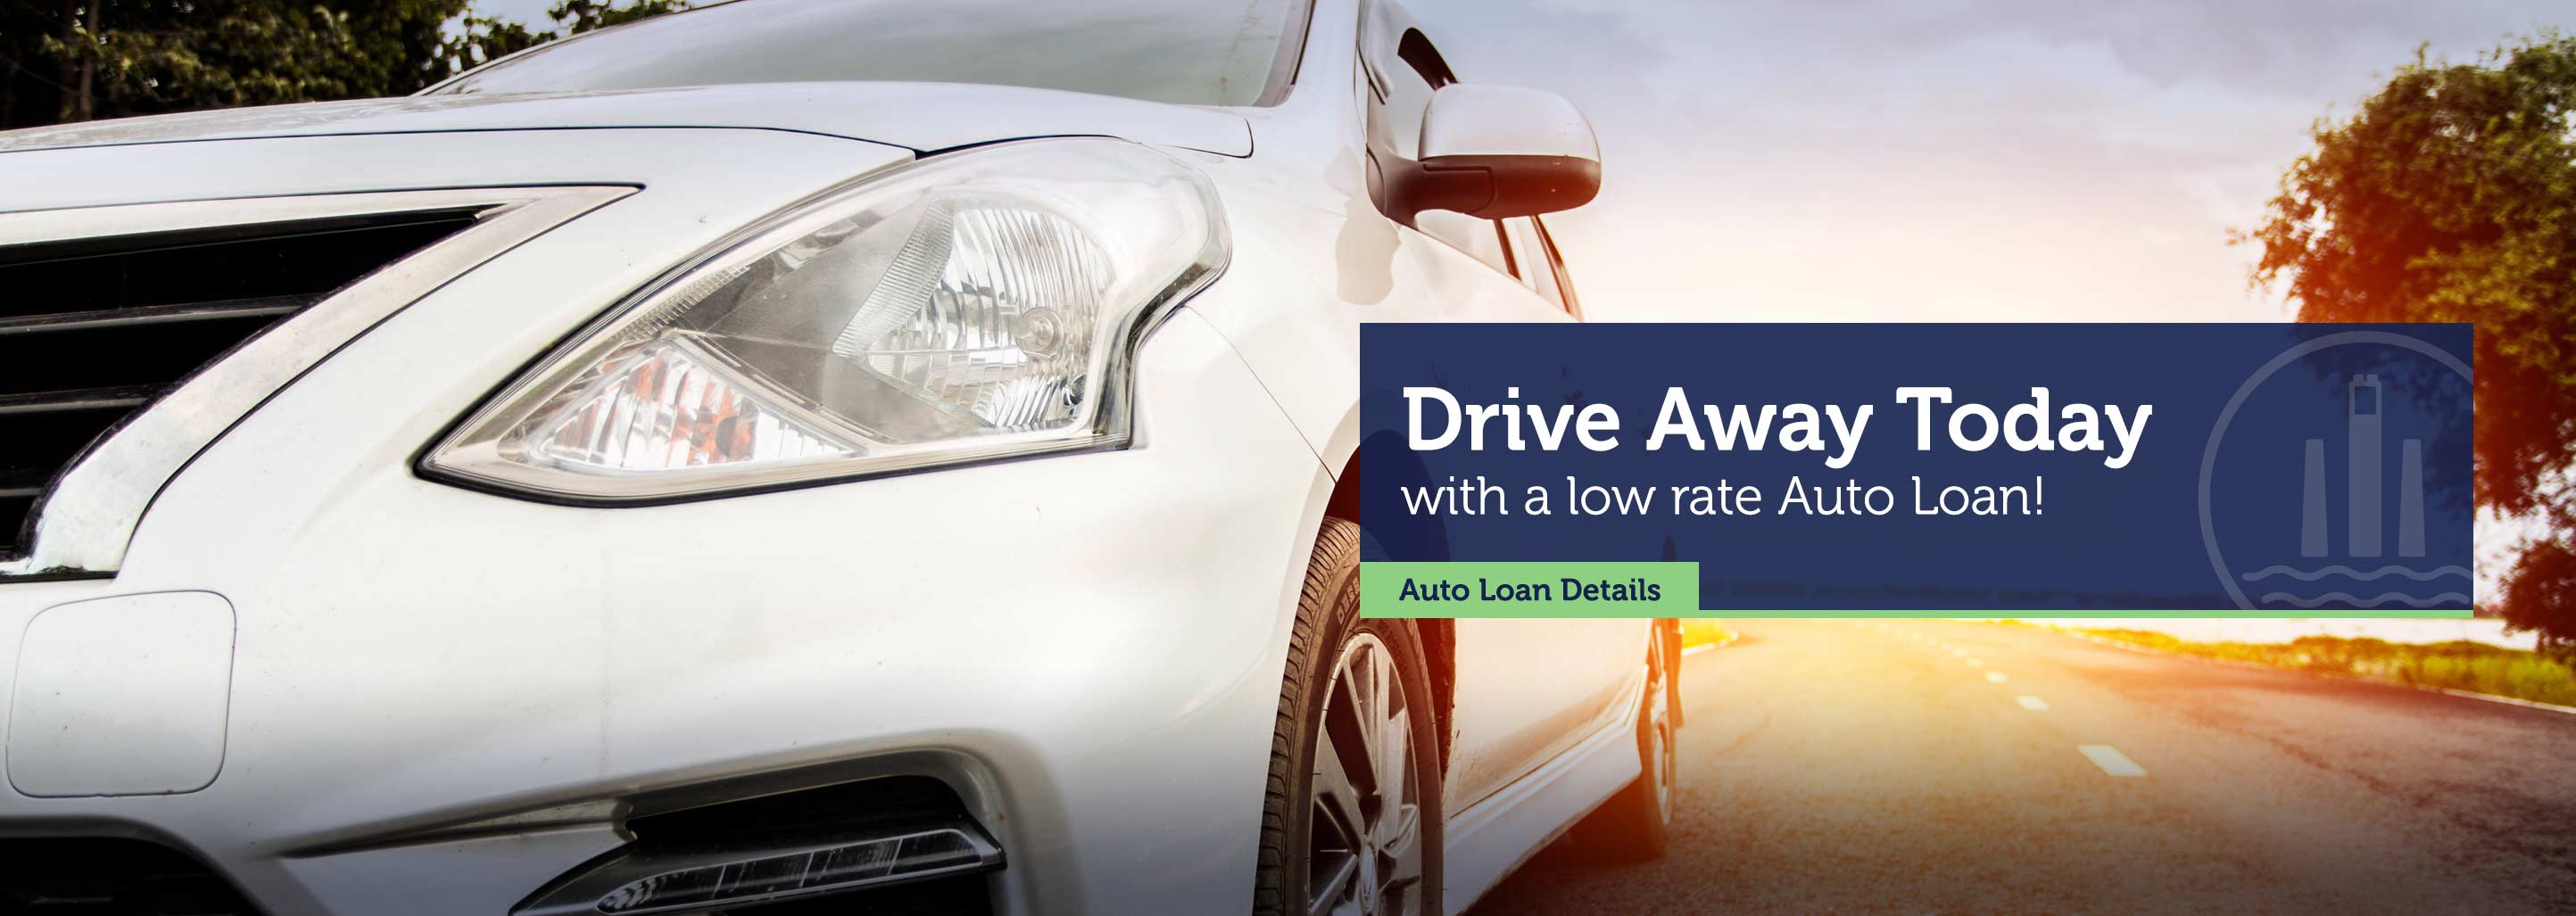 Drive away today with a low rate Auto Loan. Auto Loan Details